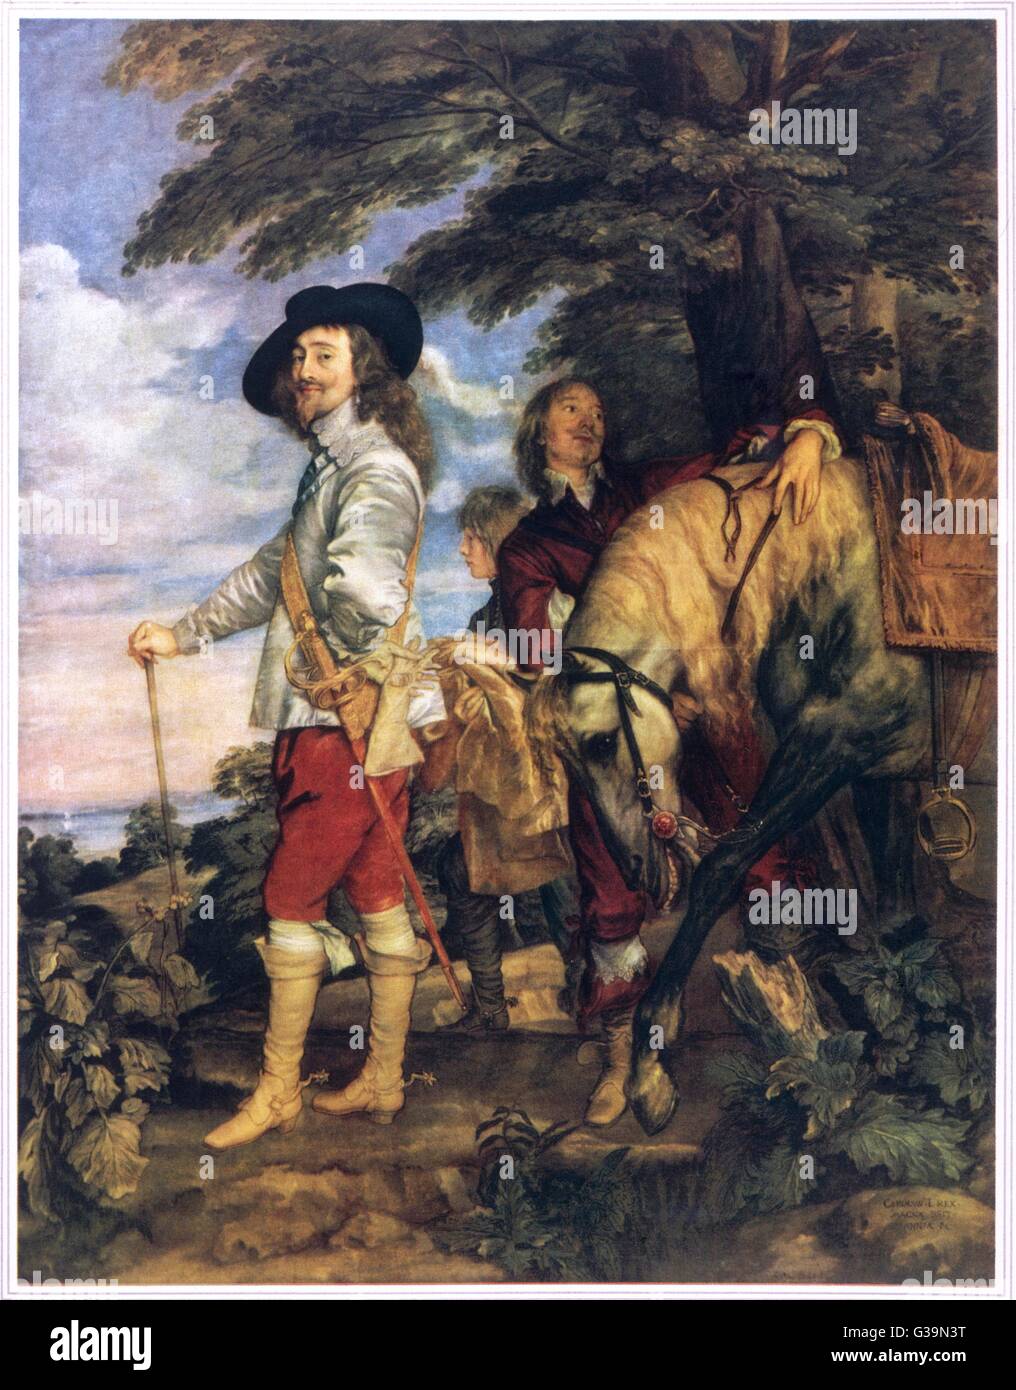 CHARLES I OF ENGLAND          Date: 1600 - 1649 Stock Photo